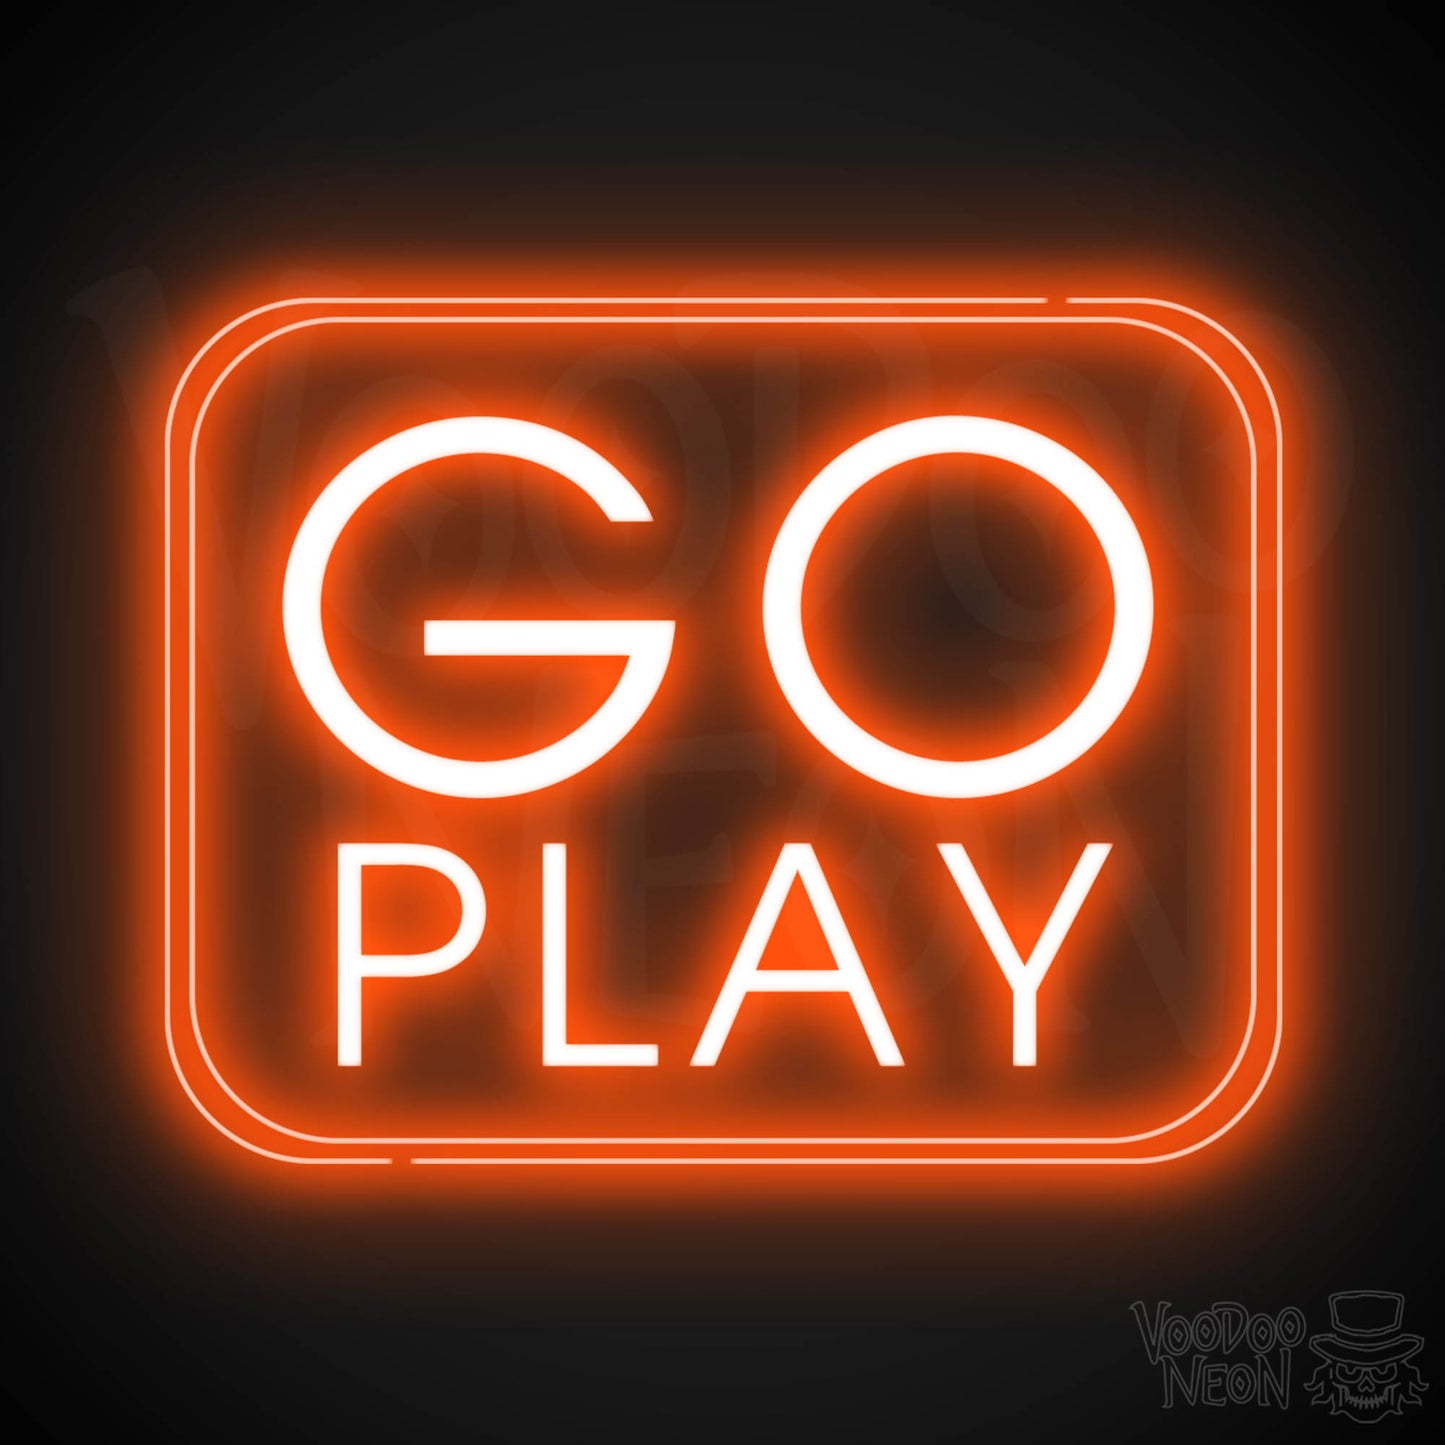 Go Play Neon Sign - Neon Go Play Sign - LED Wall Art - Color Orange